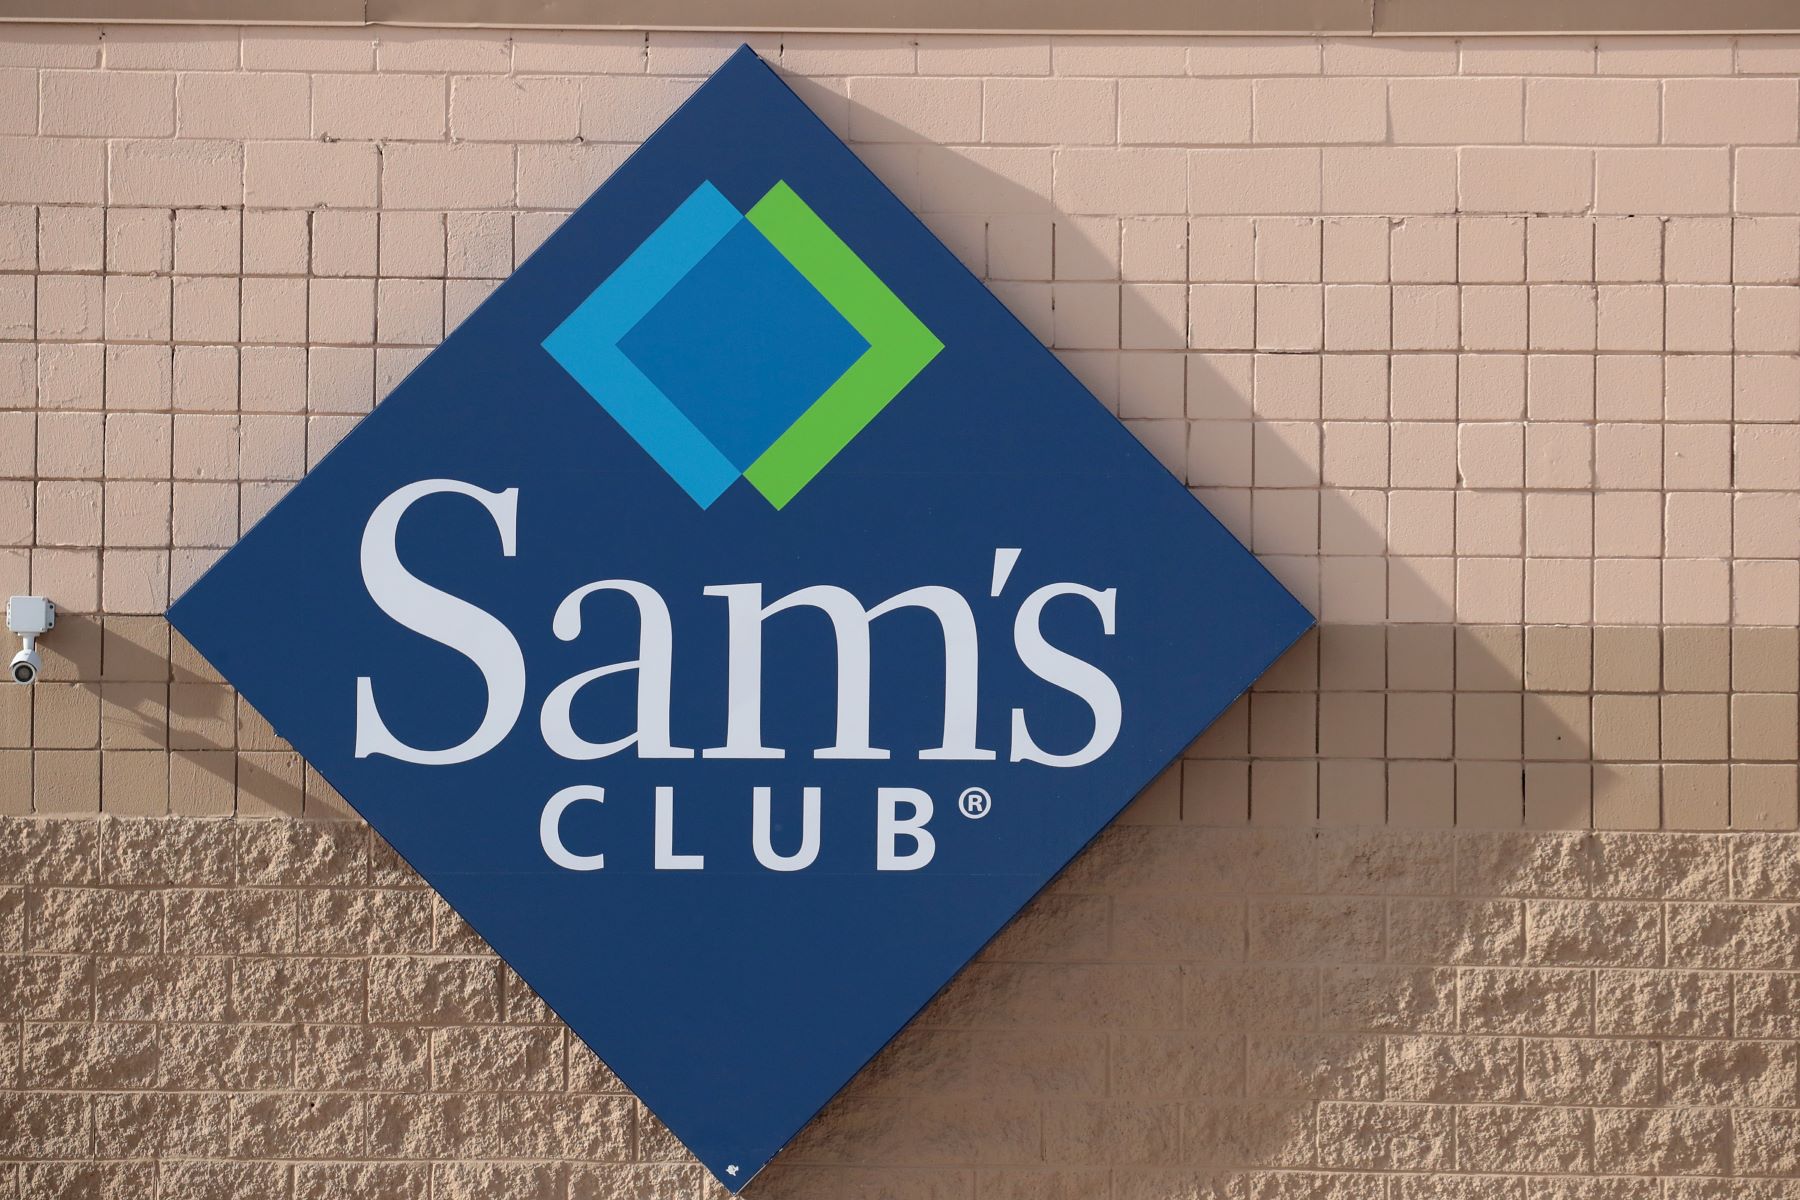 A Sam's Club logo seen at a store in Streamwood, Illinois